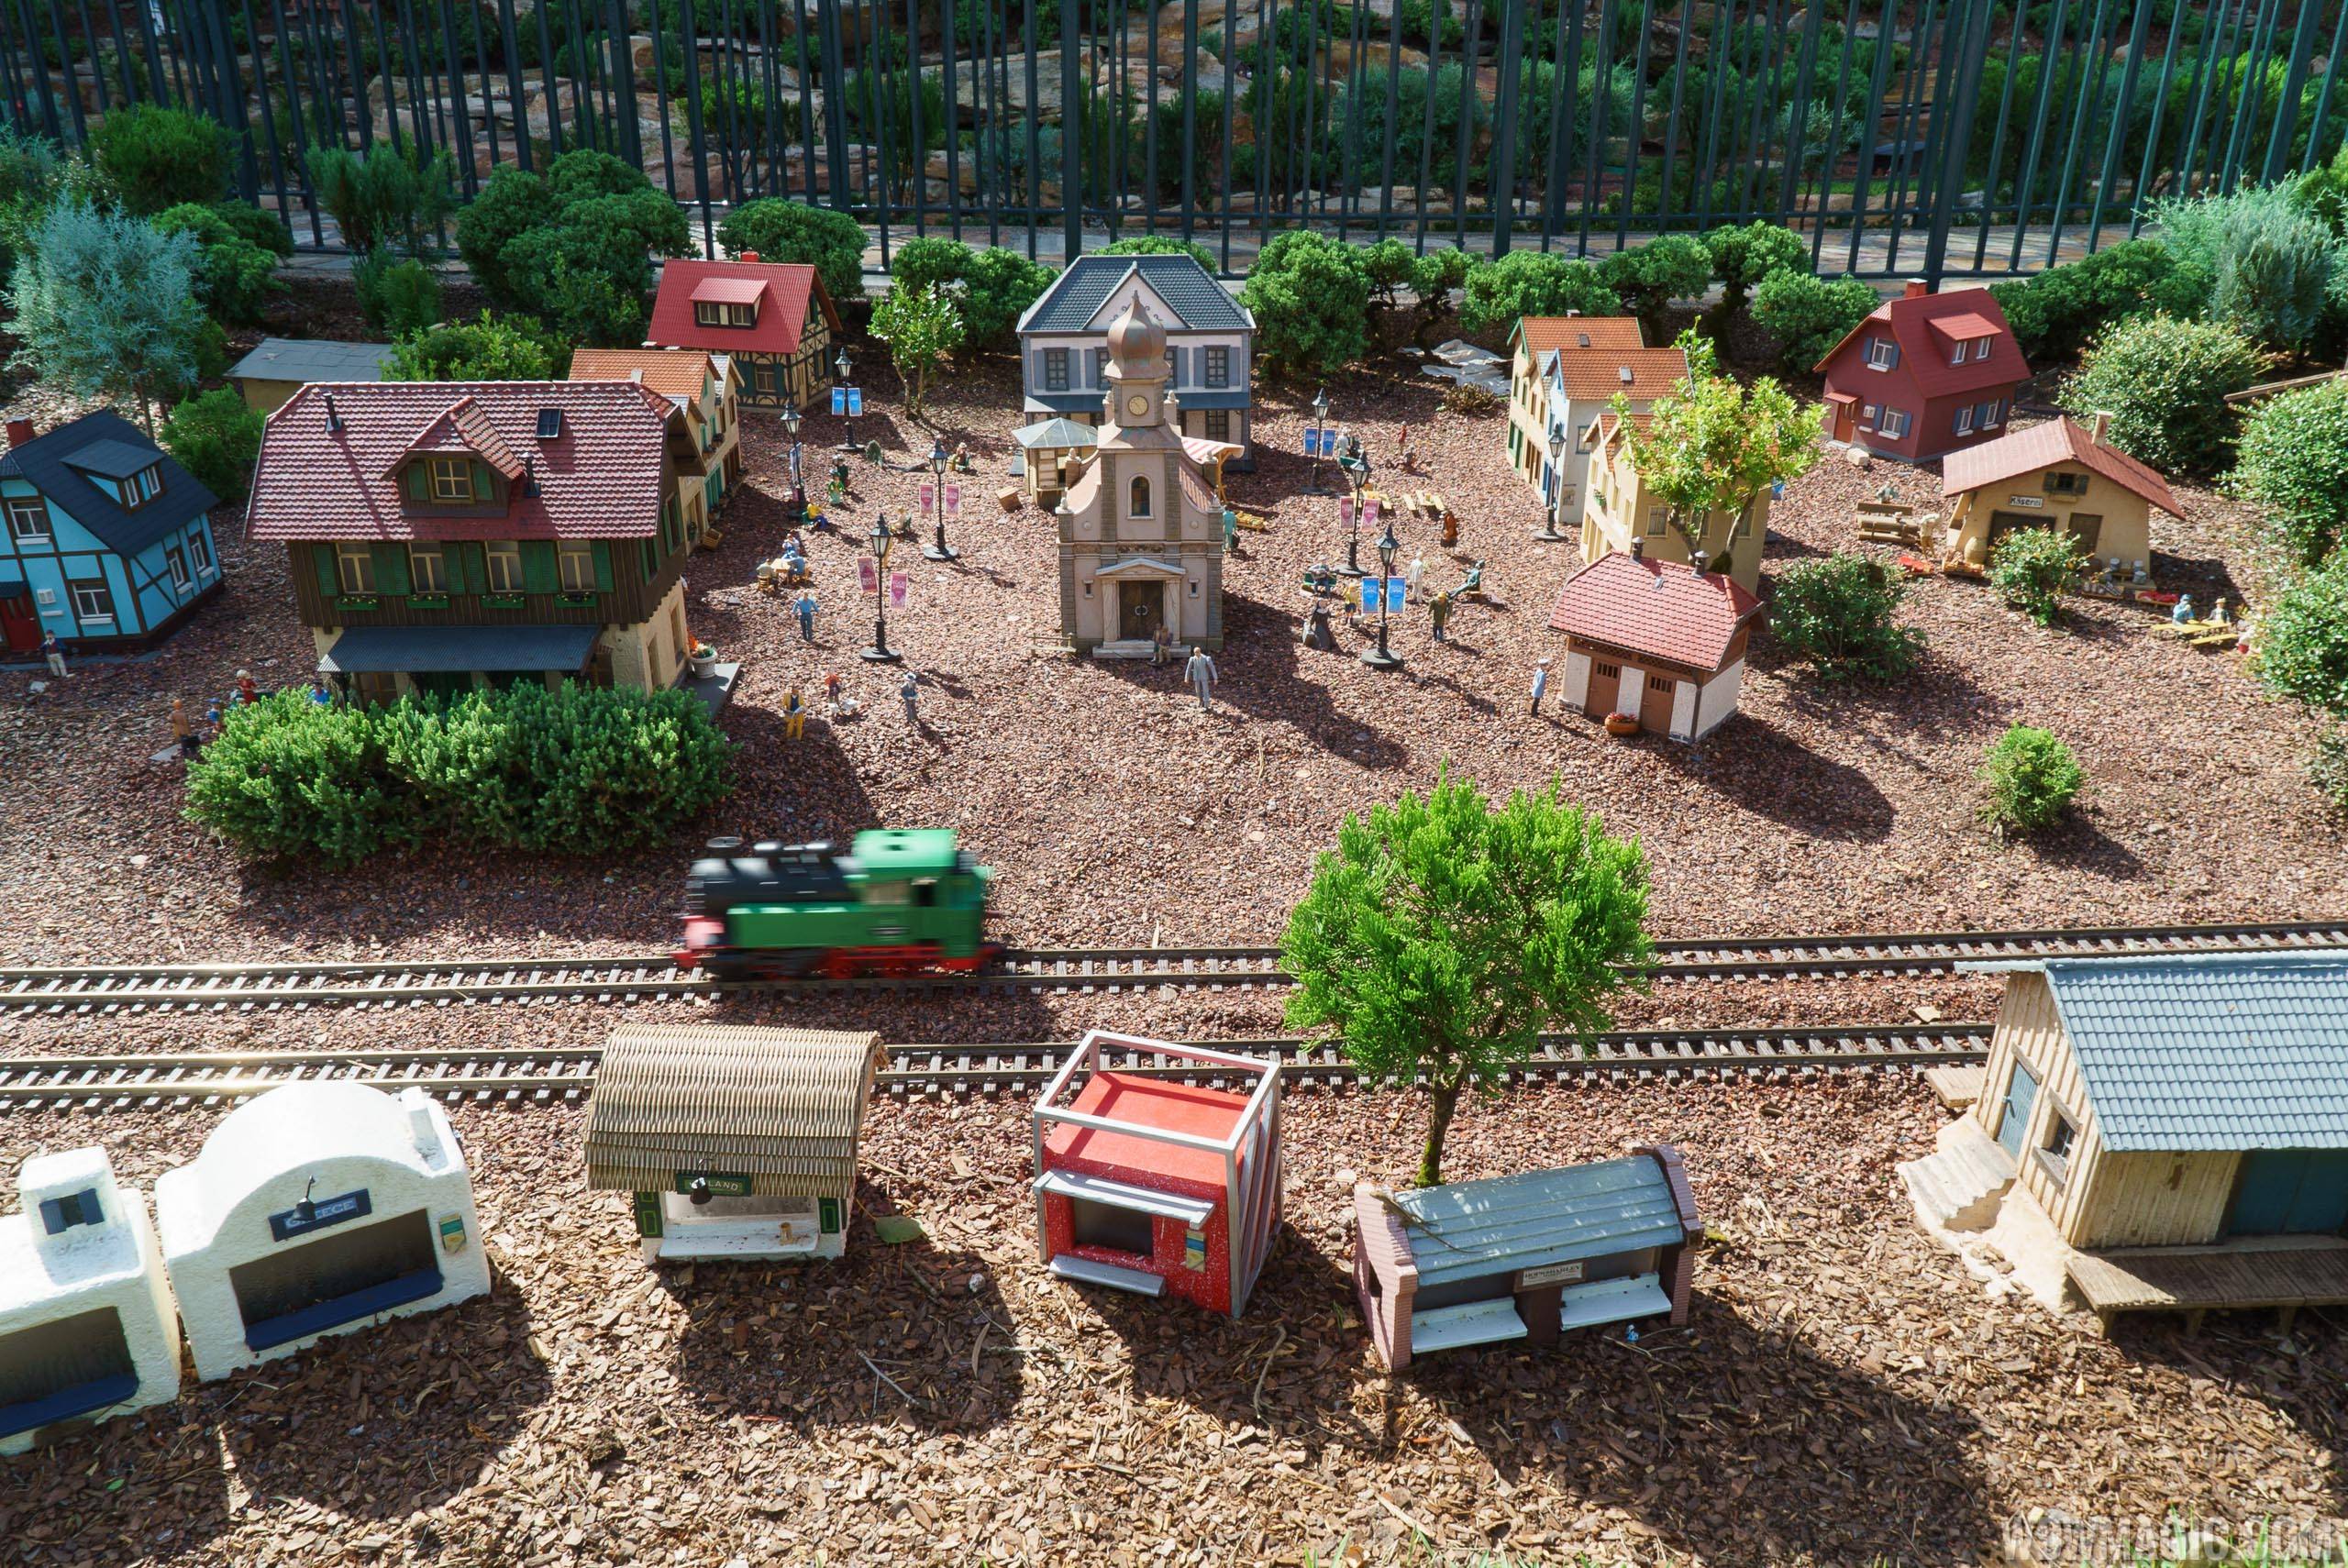 Germany Model Railroad reopening